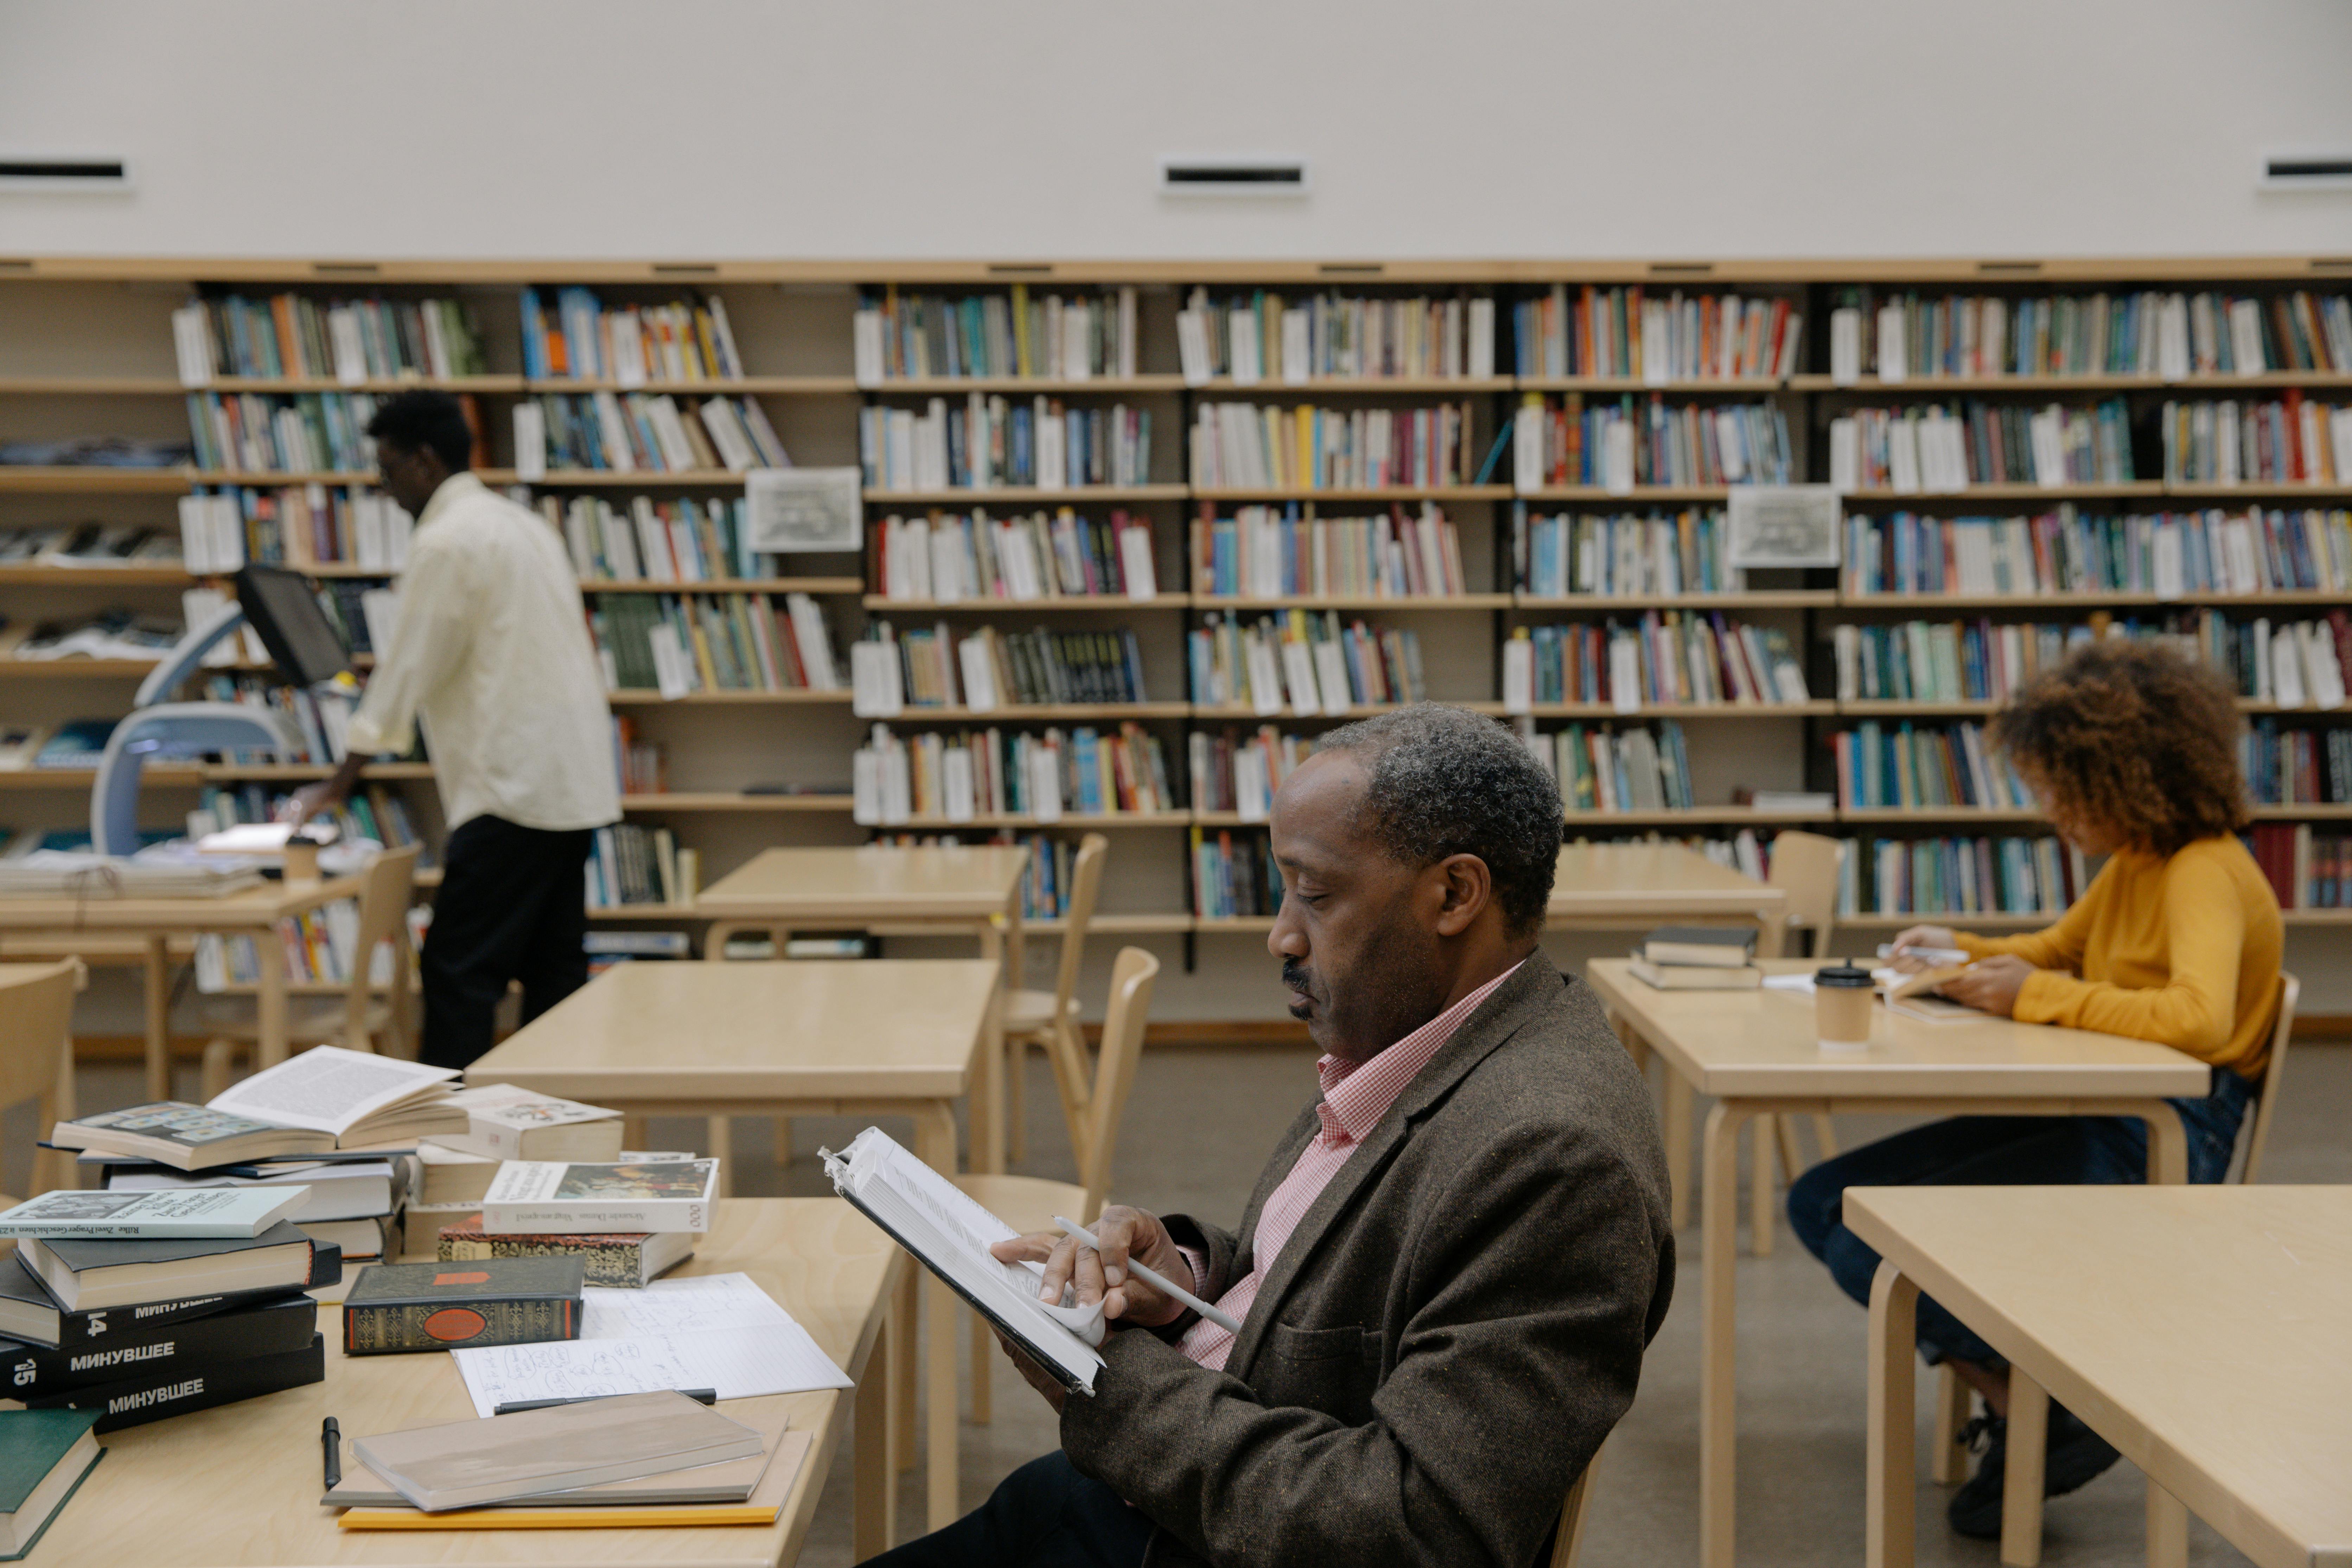 A picture of a man and a lady reading in the library